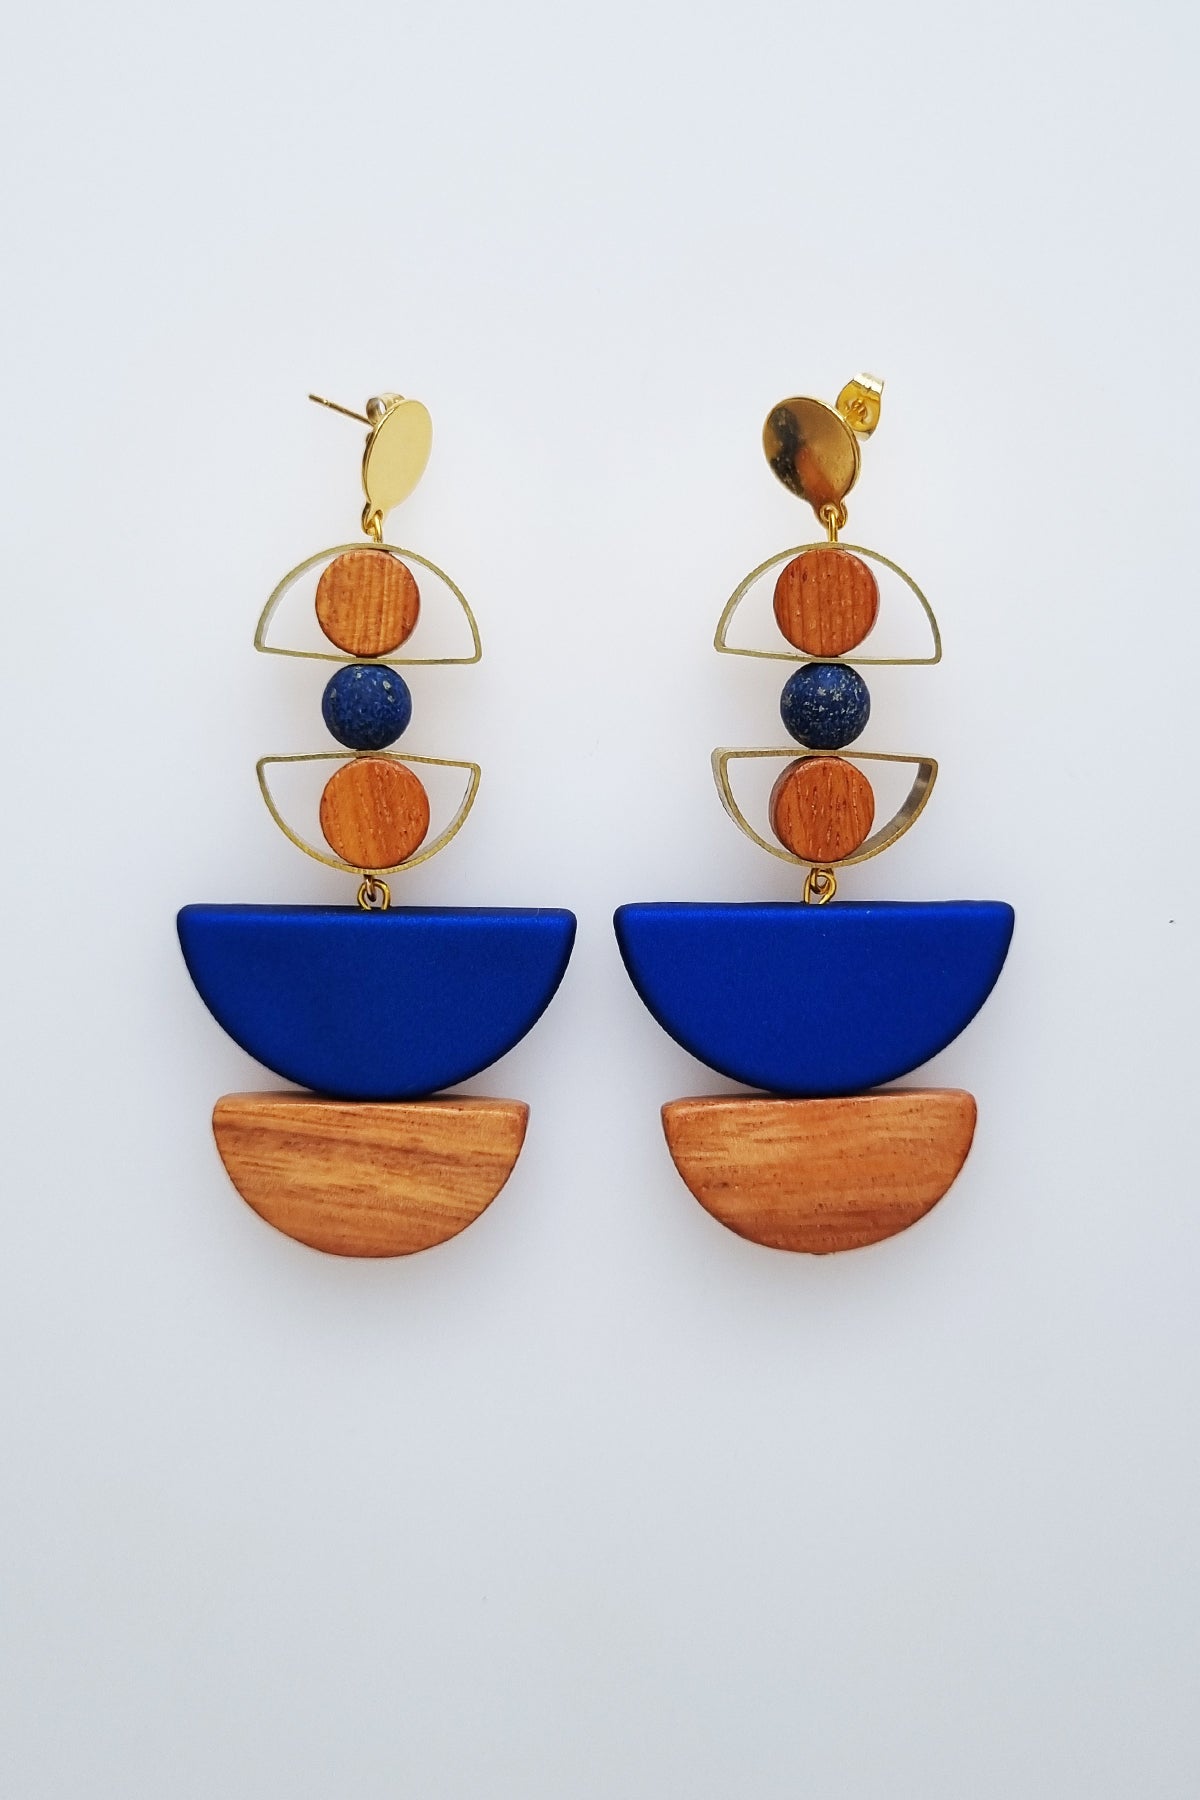 A pair of statement stud dangle earrings sit against a white background. They feature a small brass arch with a round wooden bead inside the arch, followed by a blue bead, another small brass arch upturned with a wooden circle bead inside, followed by a blue D shape bead, and wooden a D shape bead.